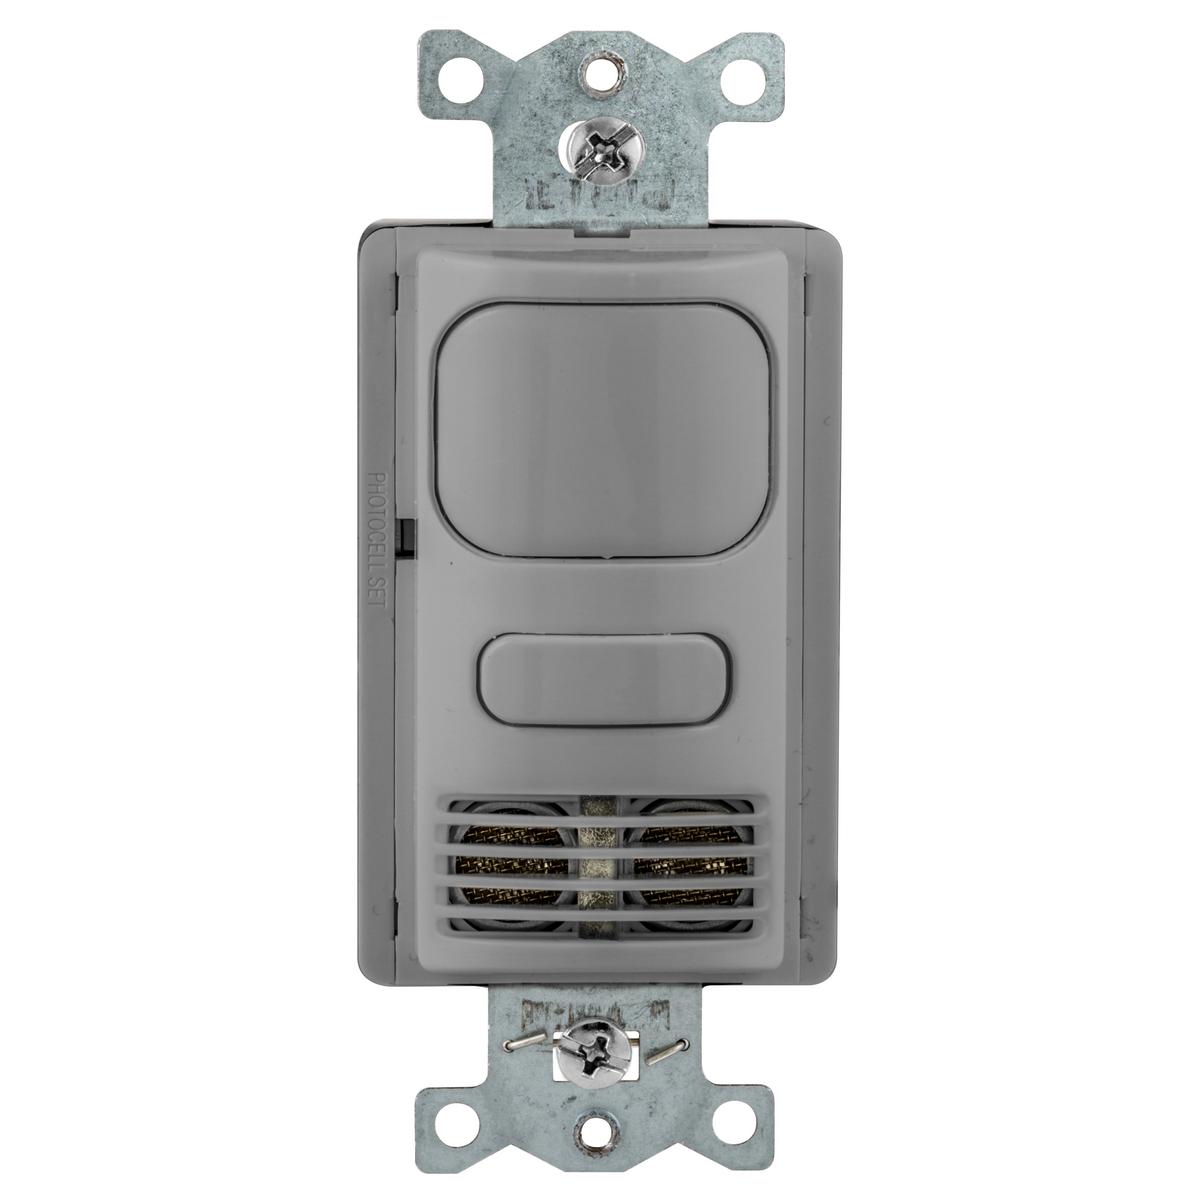 Hubbell AD2001GY1 Occupancy Sensing Products, Wall Switch,Vacancy, Dual Tech, 1 Relay, 1000 Square Feet, 800W Incandescent, 1000WFluorescent @ 120V AC, 1800W Fluorescent @ 277V AC,120/277V AC, WithPhotocell, Gray 